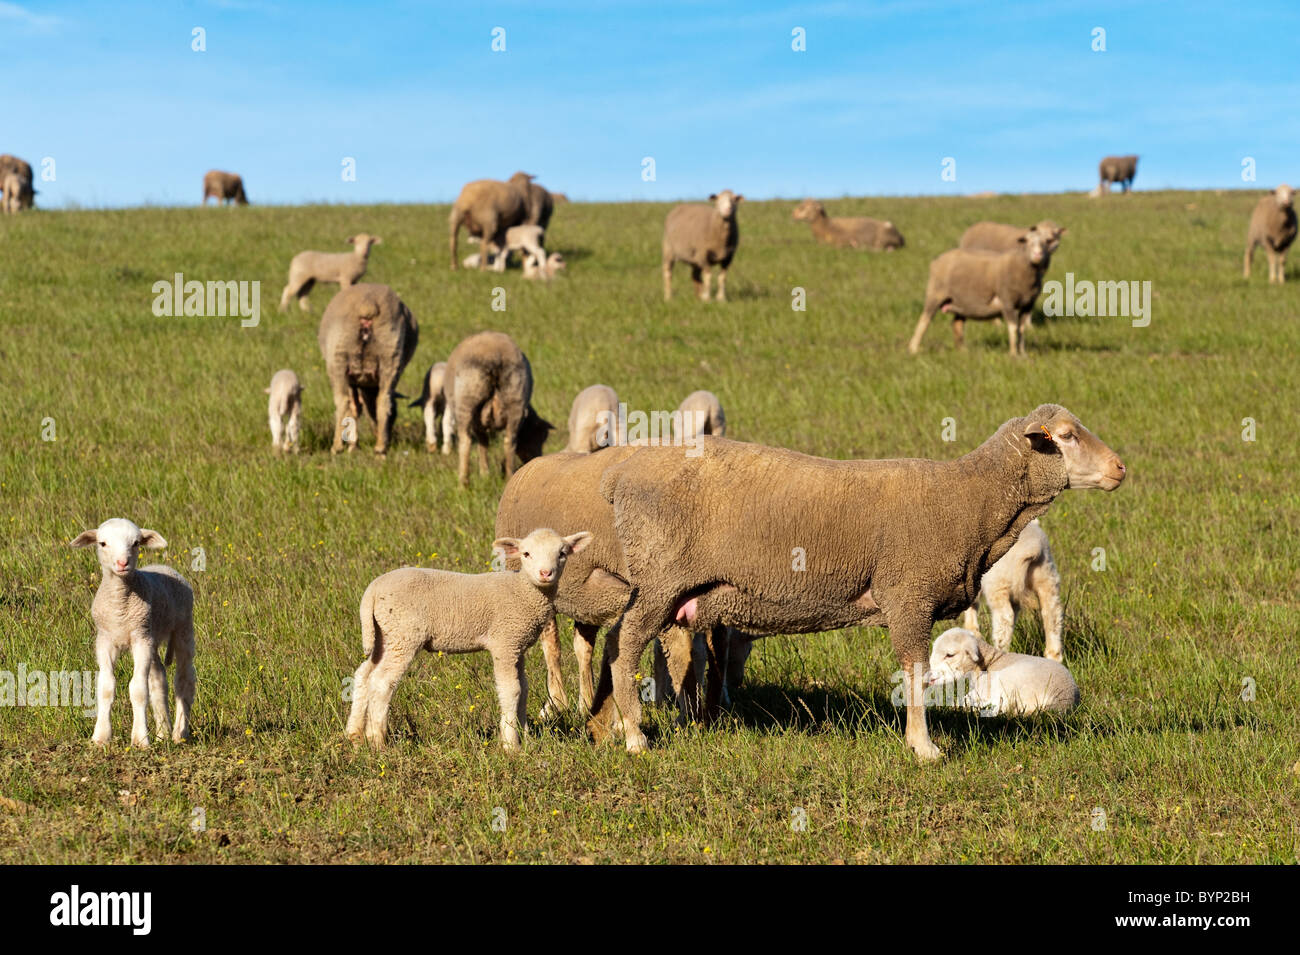 Ewe with lambs in Ouplaas, Western Cape, South Africa Stock Photo